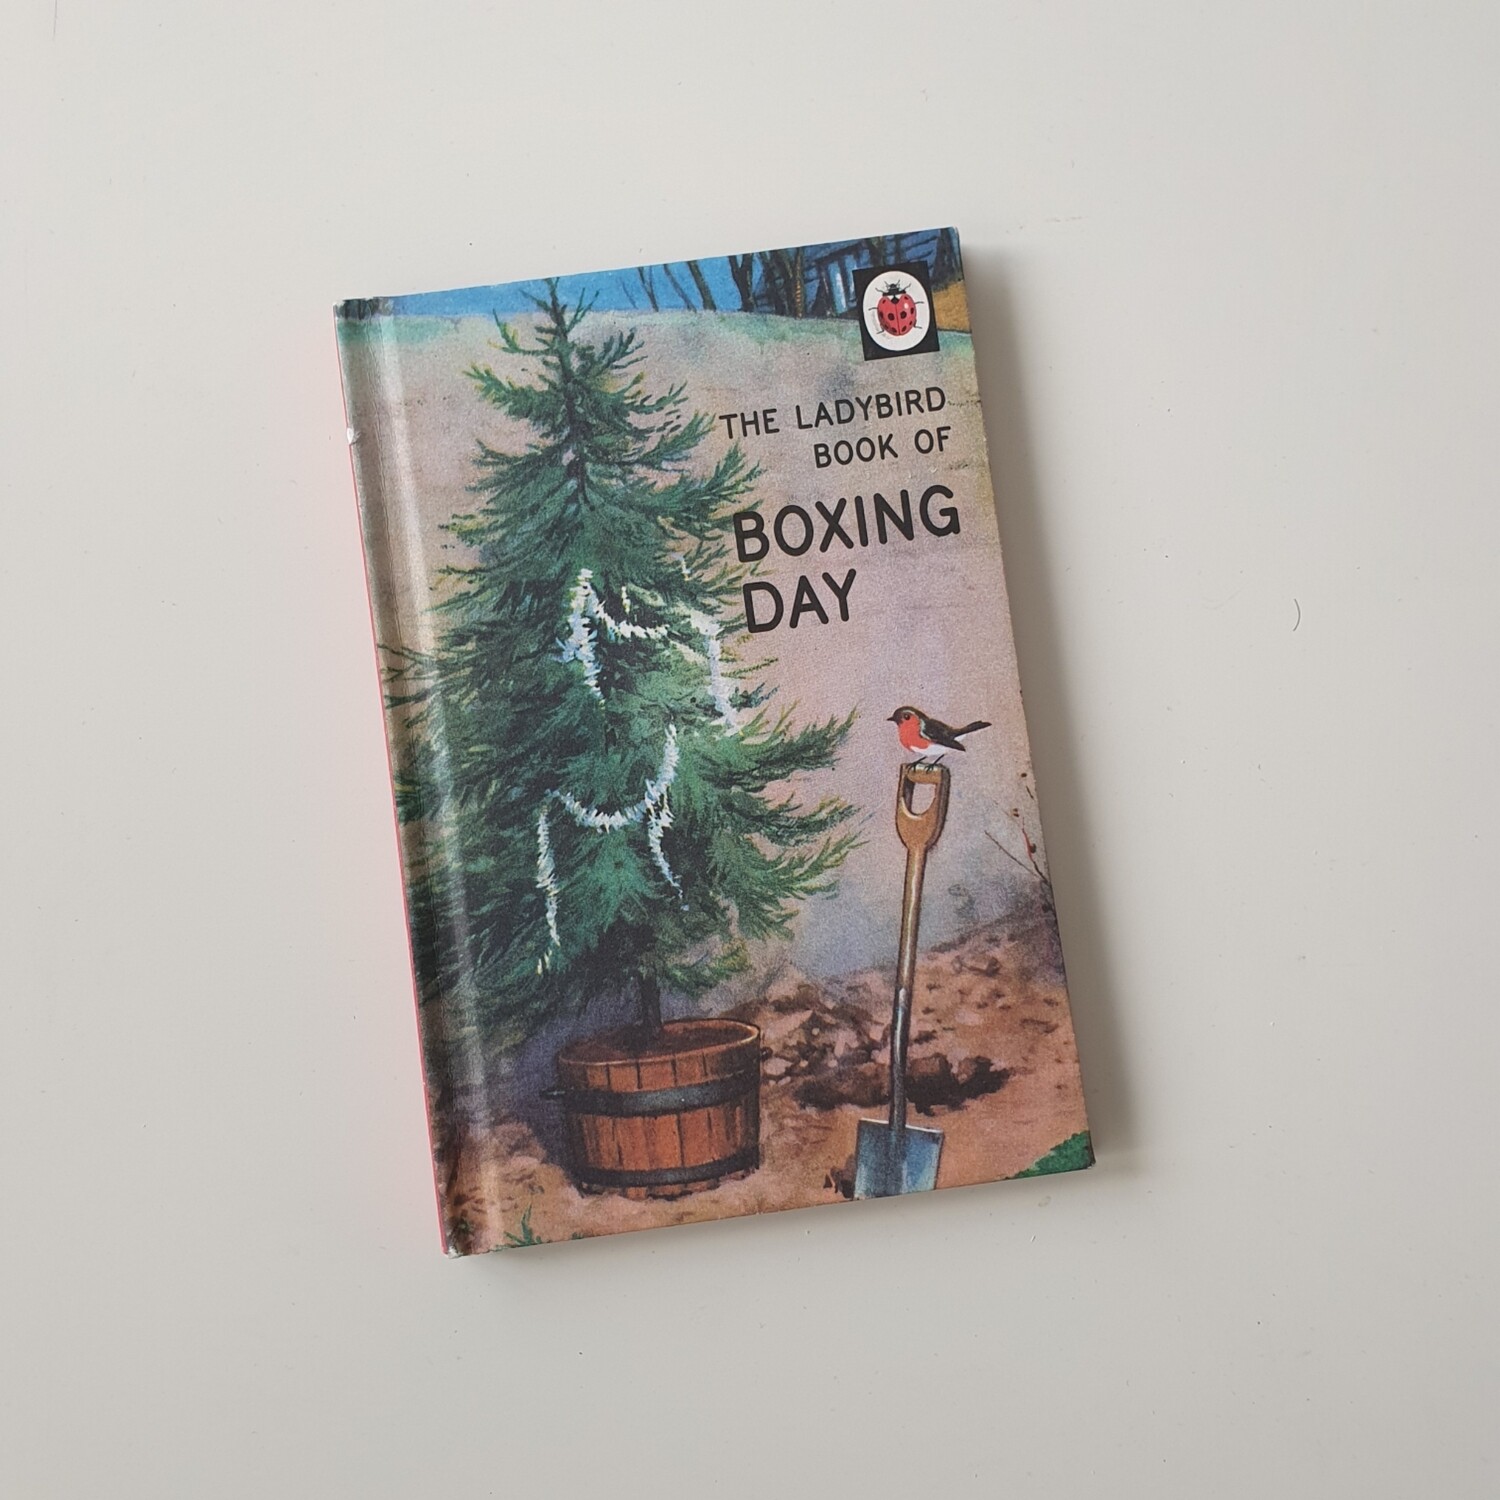 Boxing Day - ladybird book for grown ups